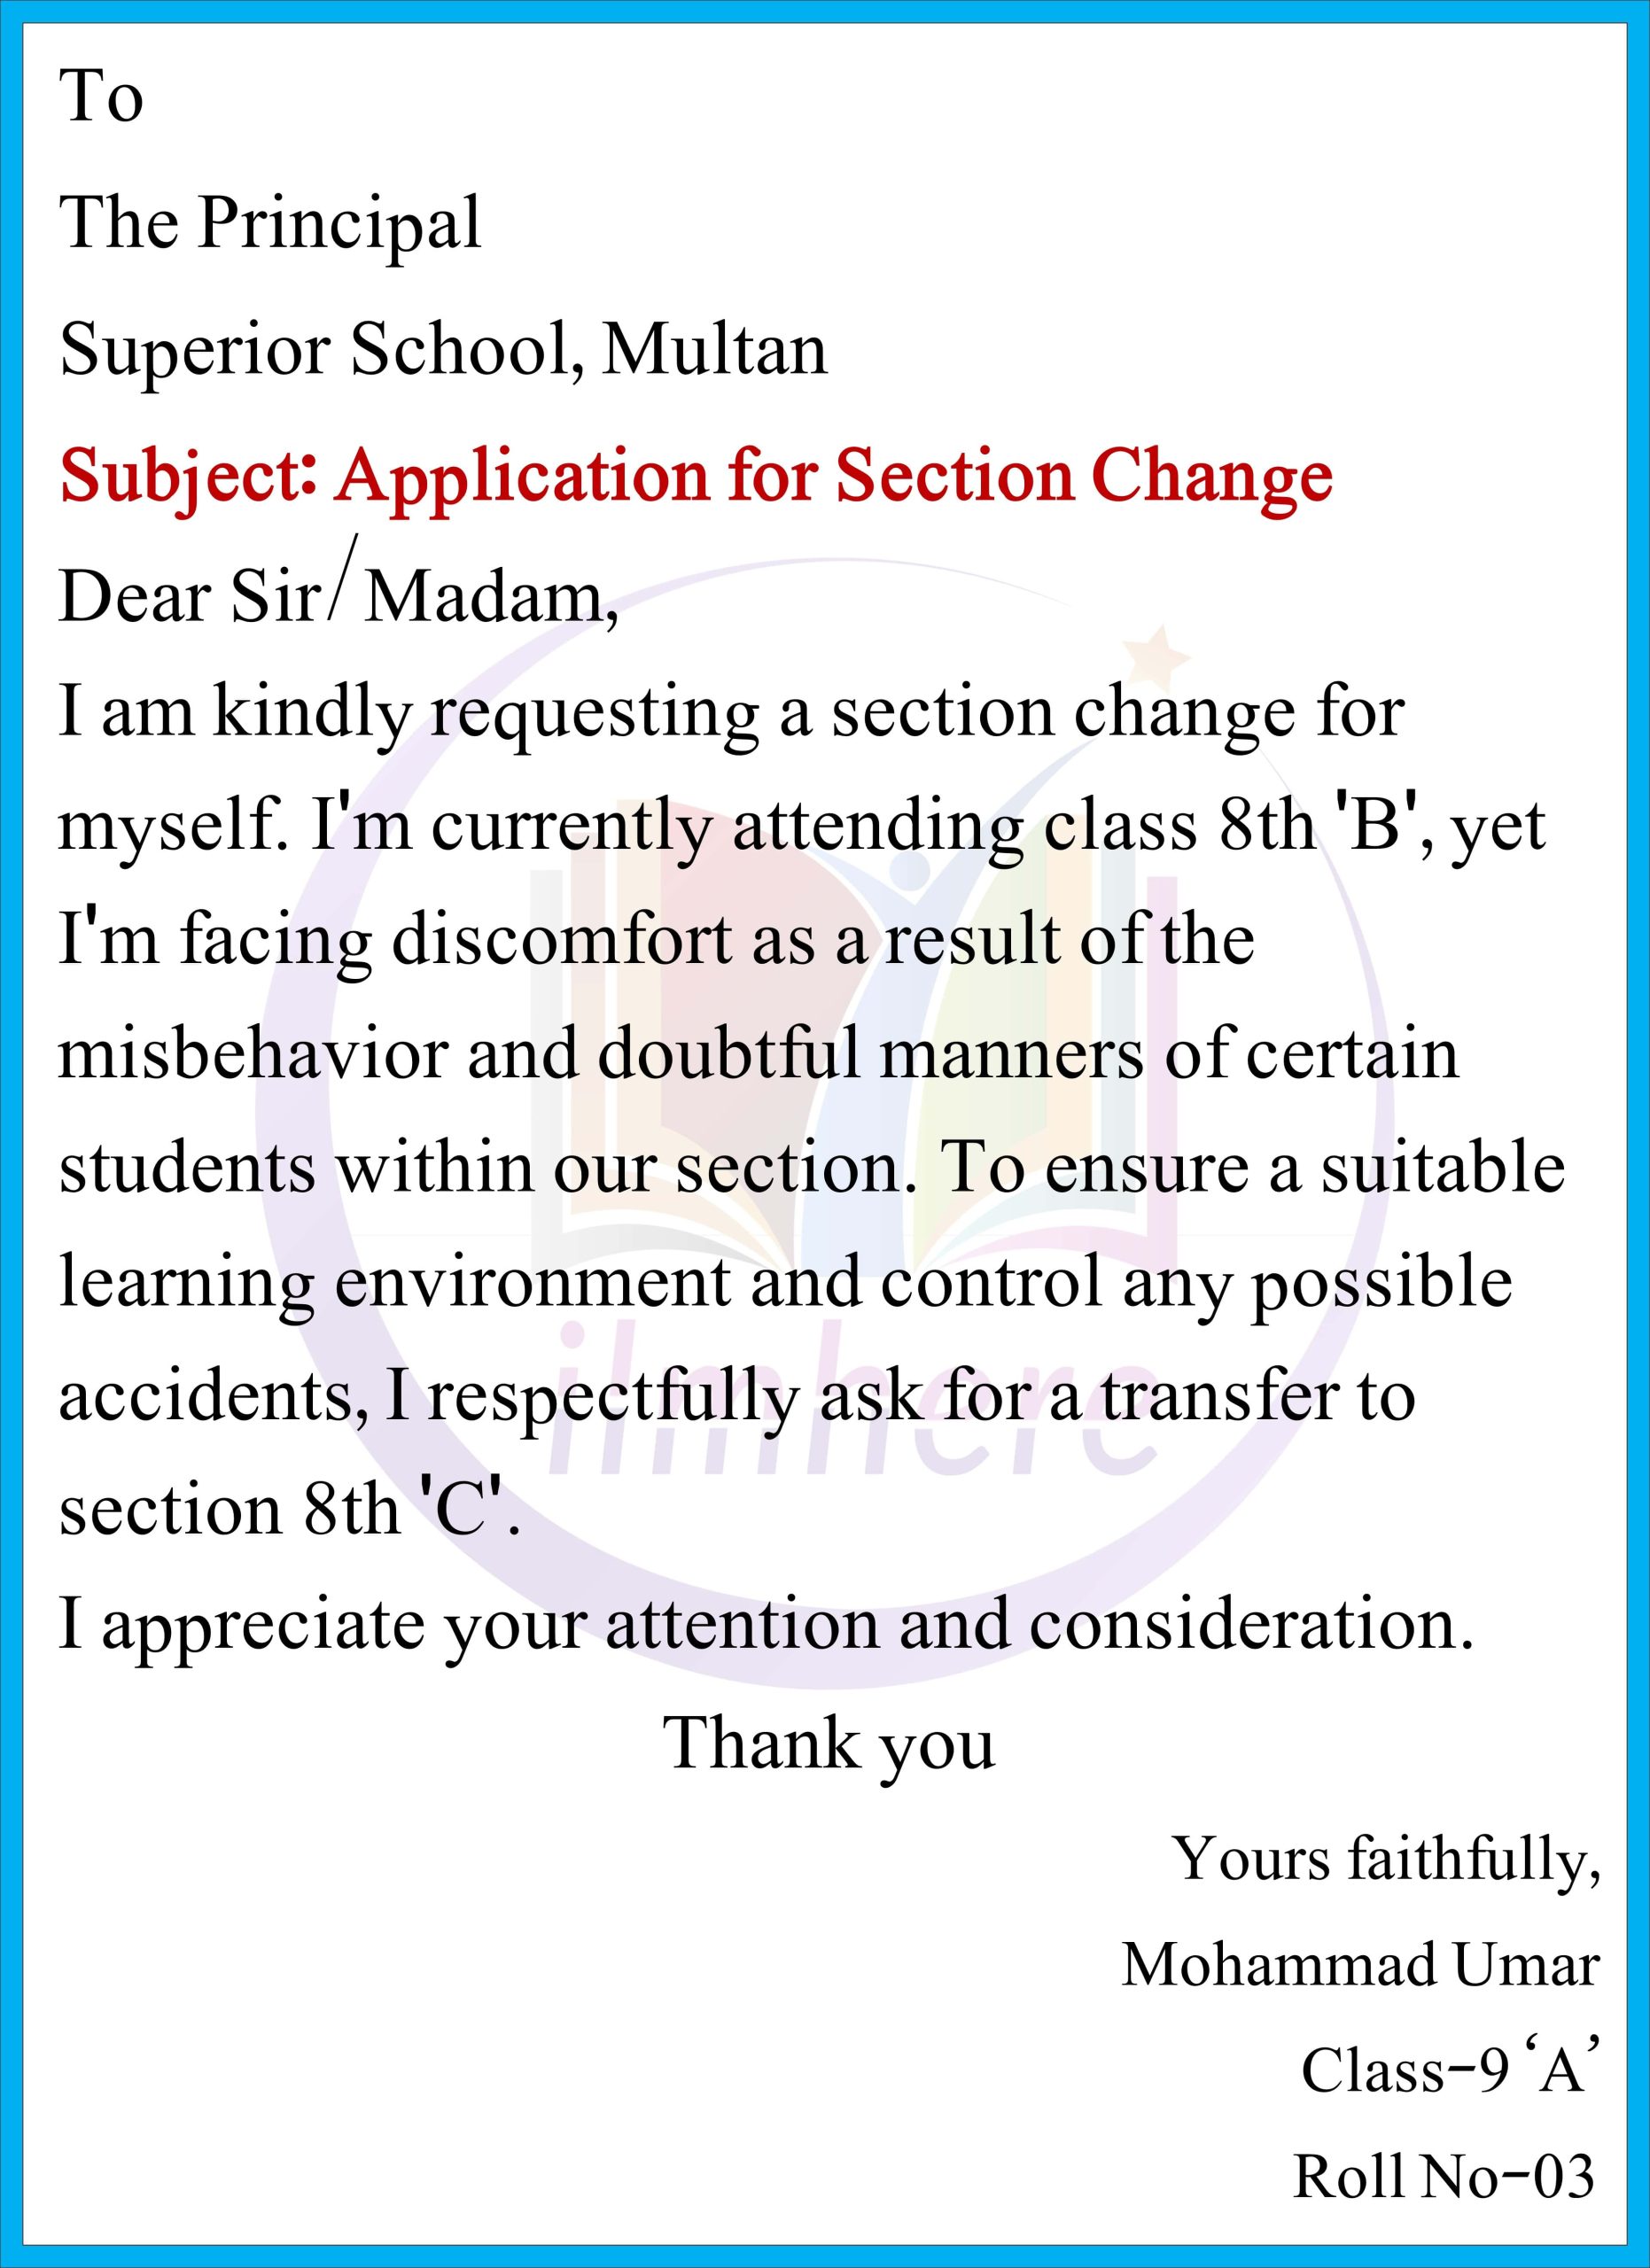 Write an Application to your principal to change your class section because students' misbehavior